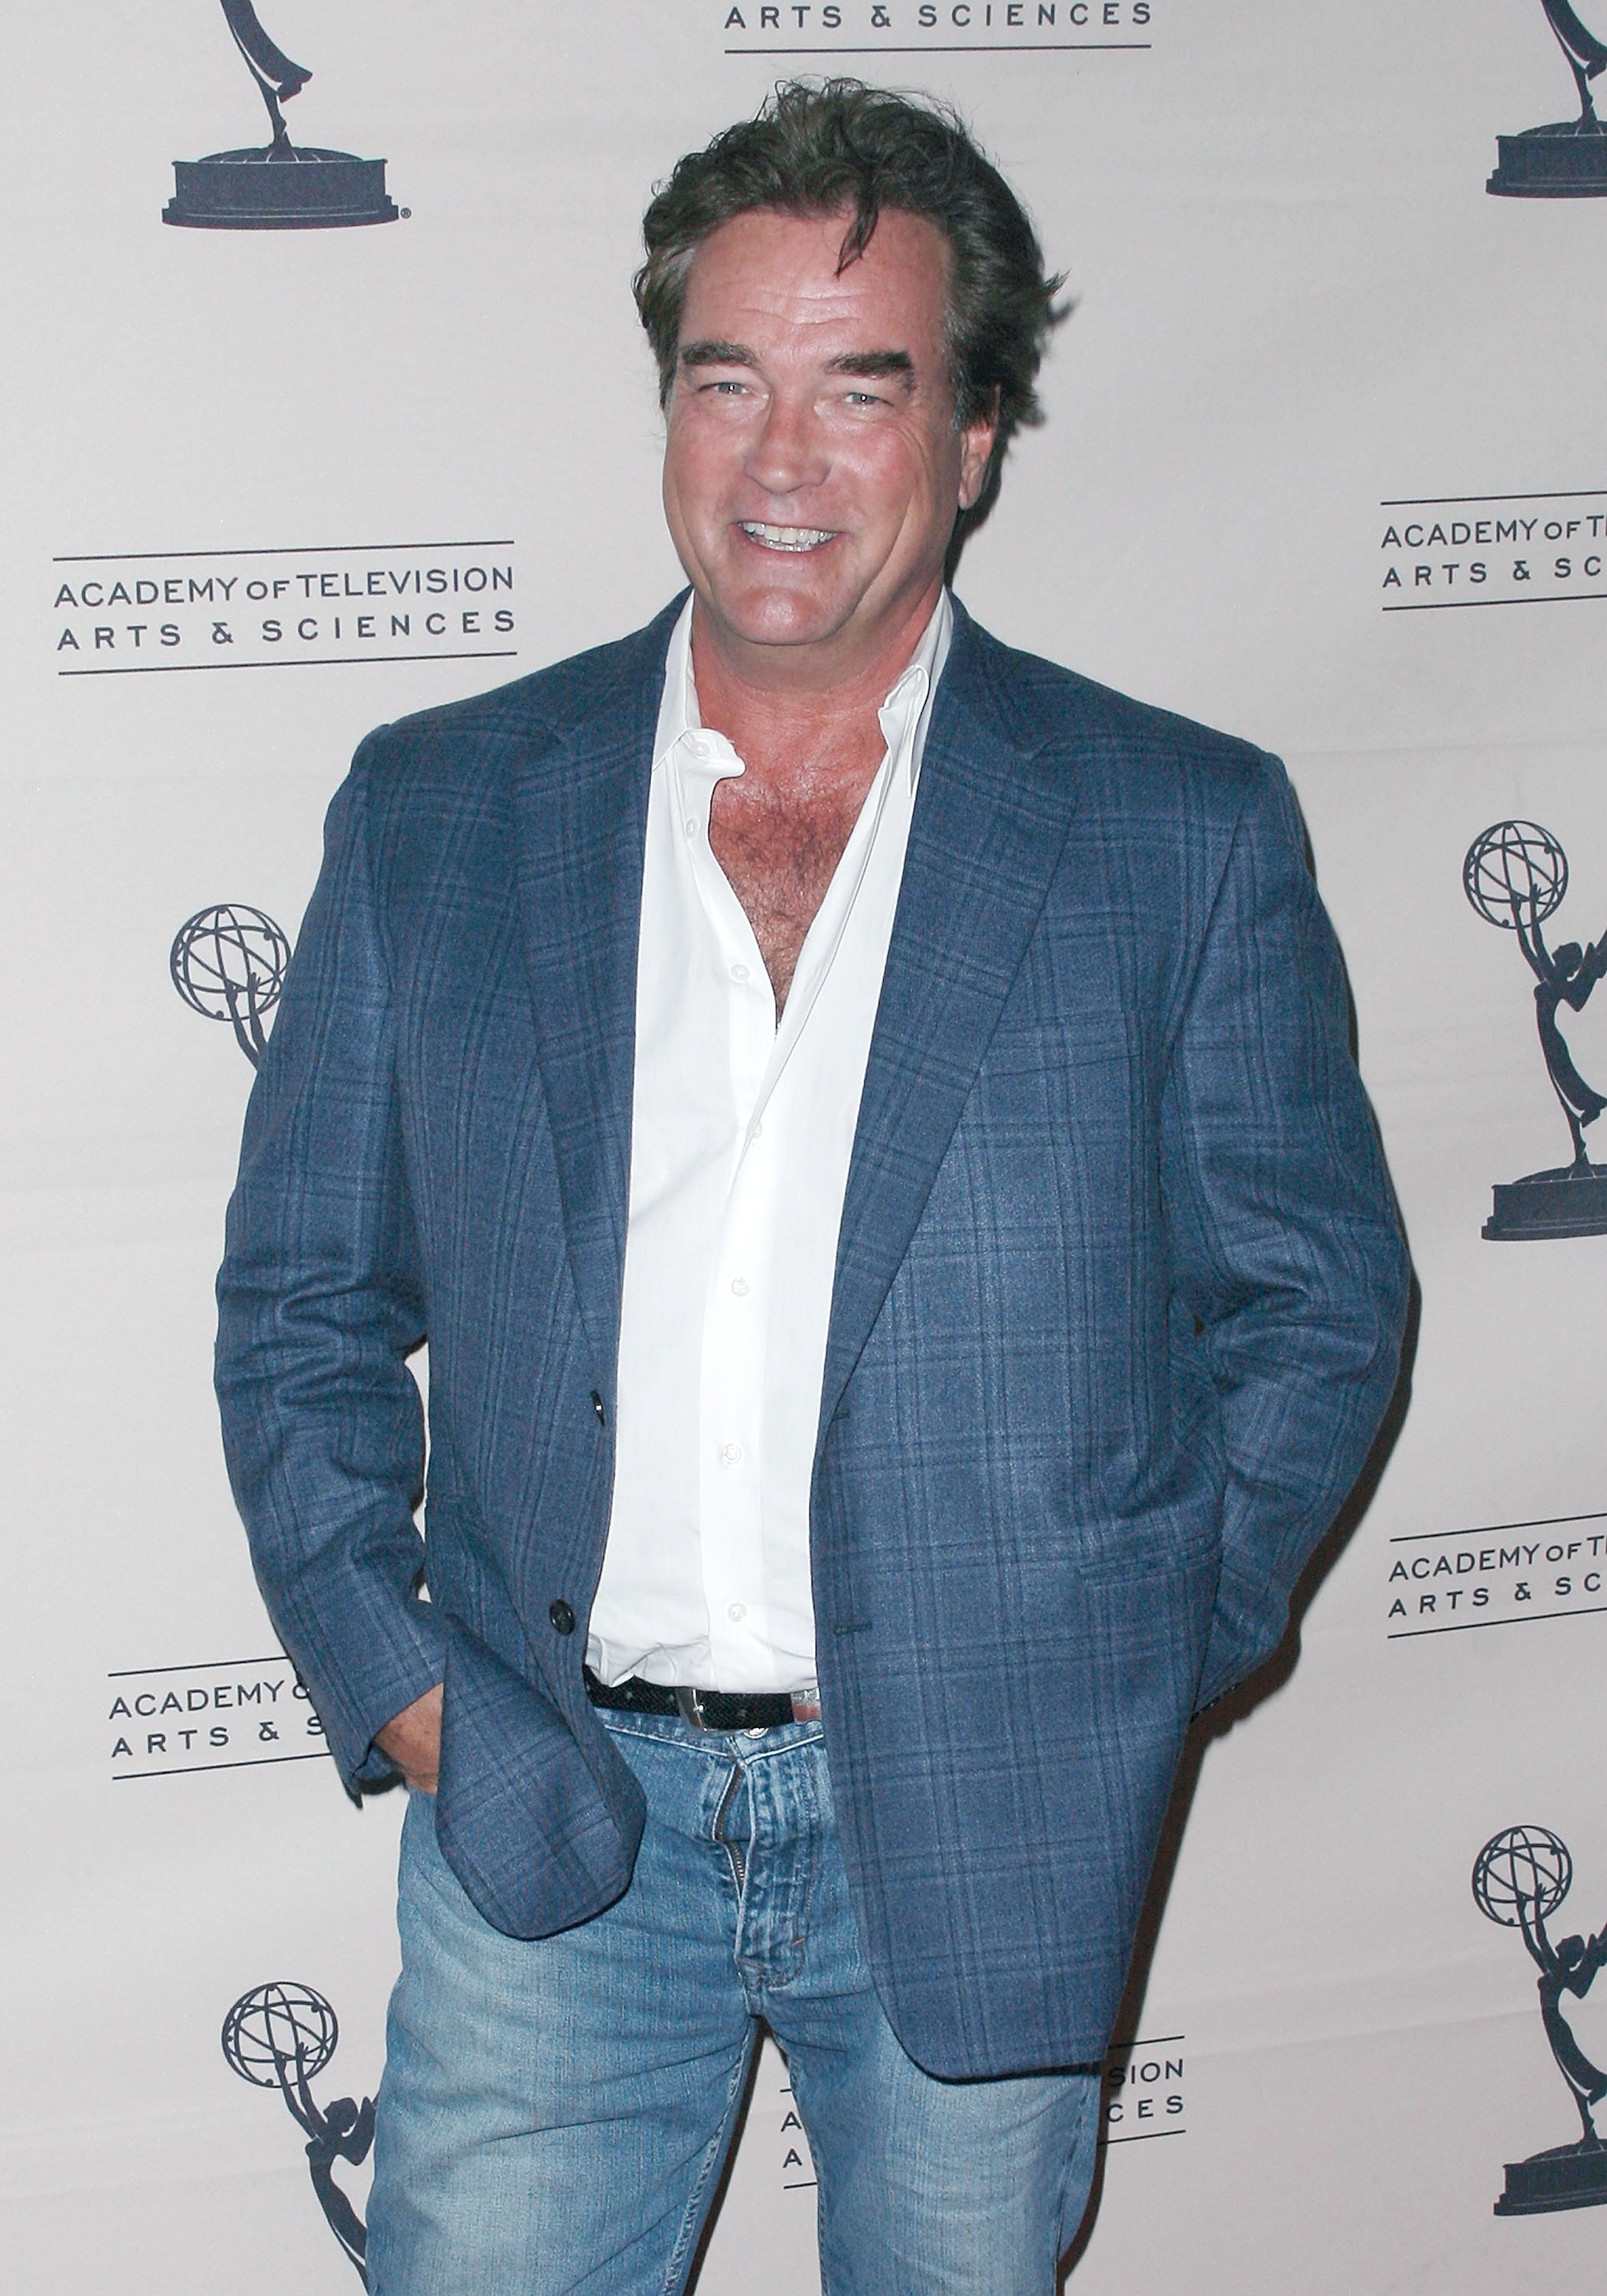 Actor John Callahan at the Academy Of Television's presentation to "Celebrate 45 Years Of Days Of Our Lives" at Leonard H. Goldenson Theatre in North Hollywood, California | Photo: Paul Archuleta/FilmMagic